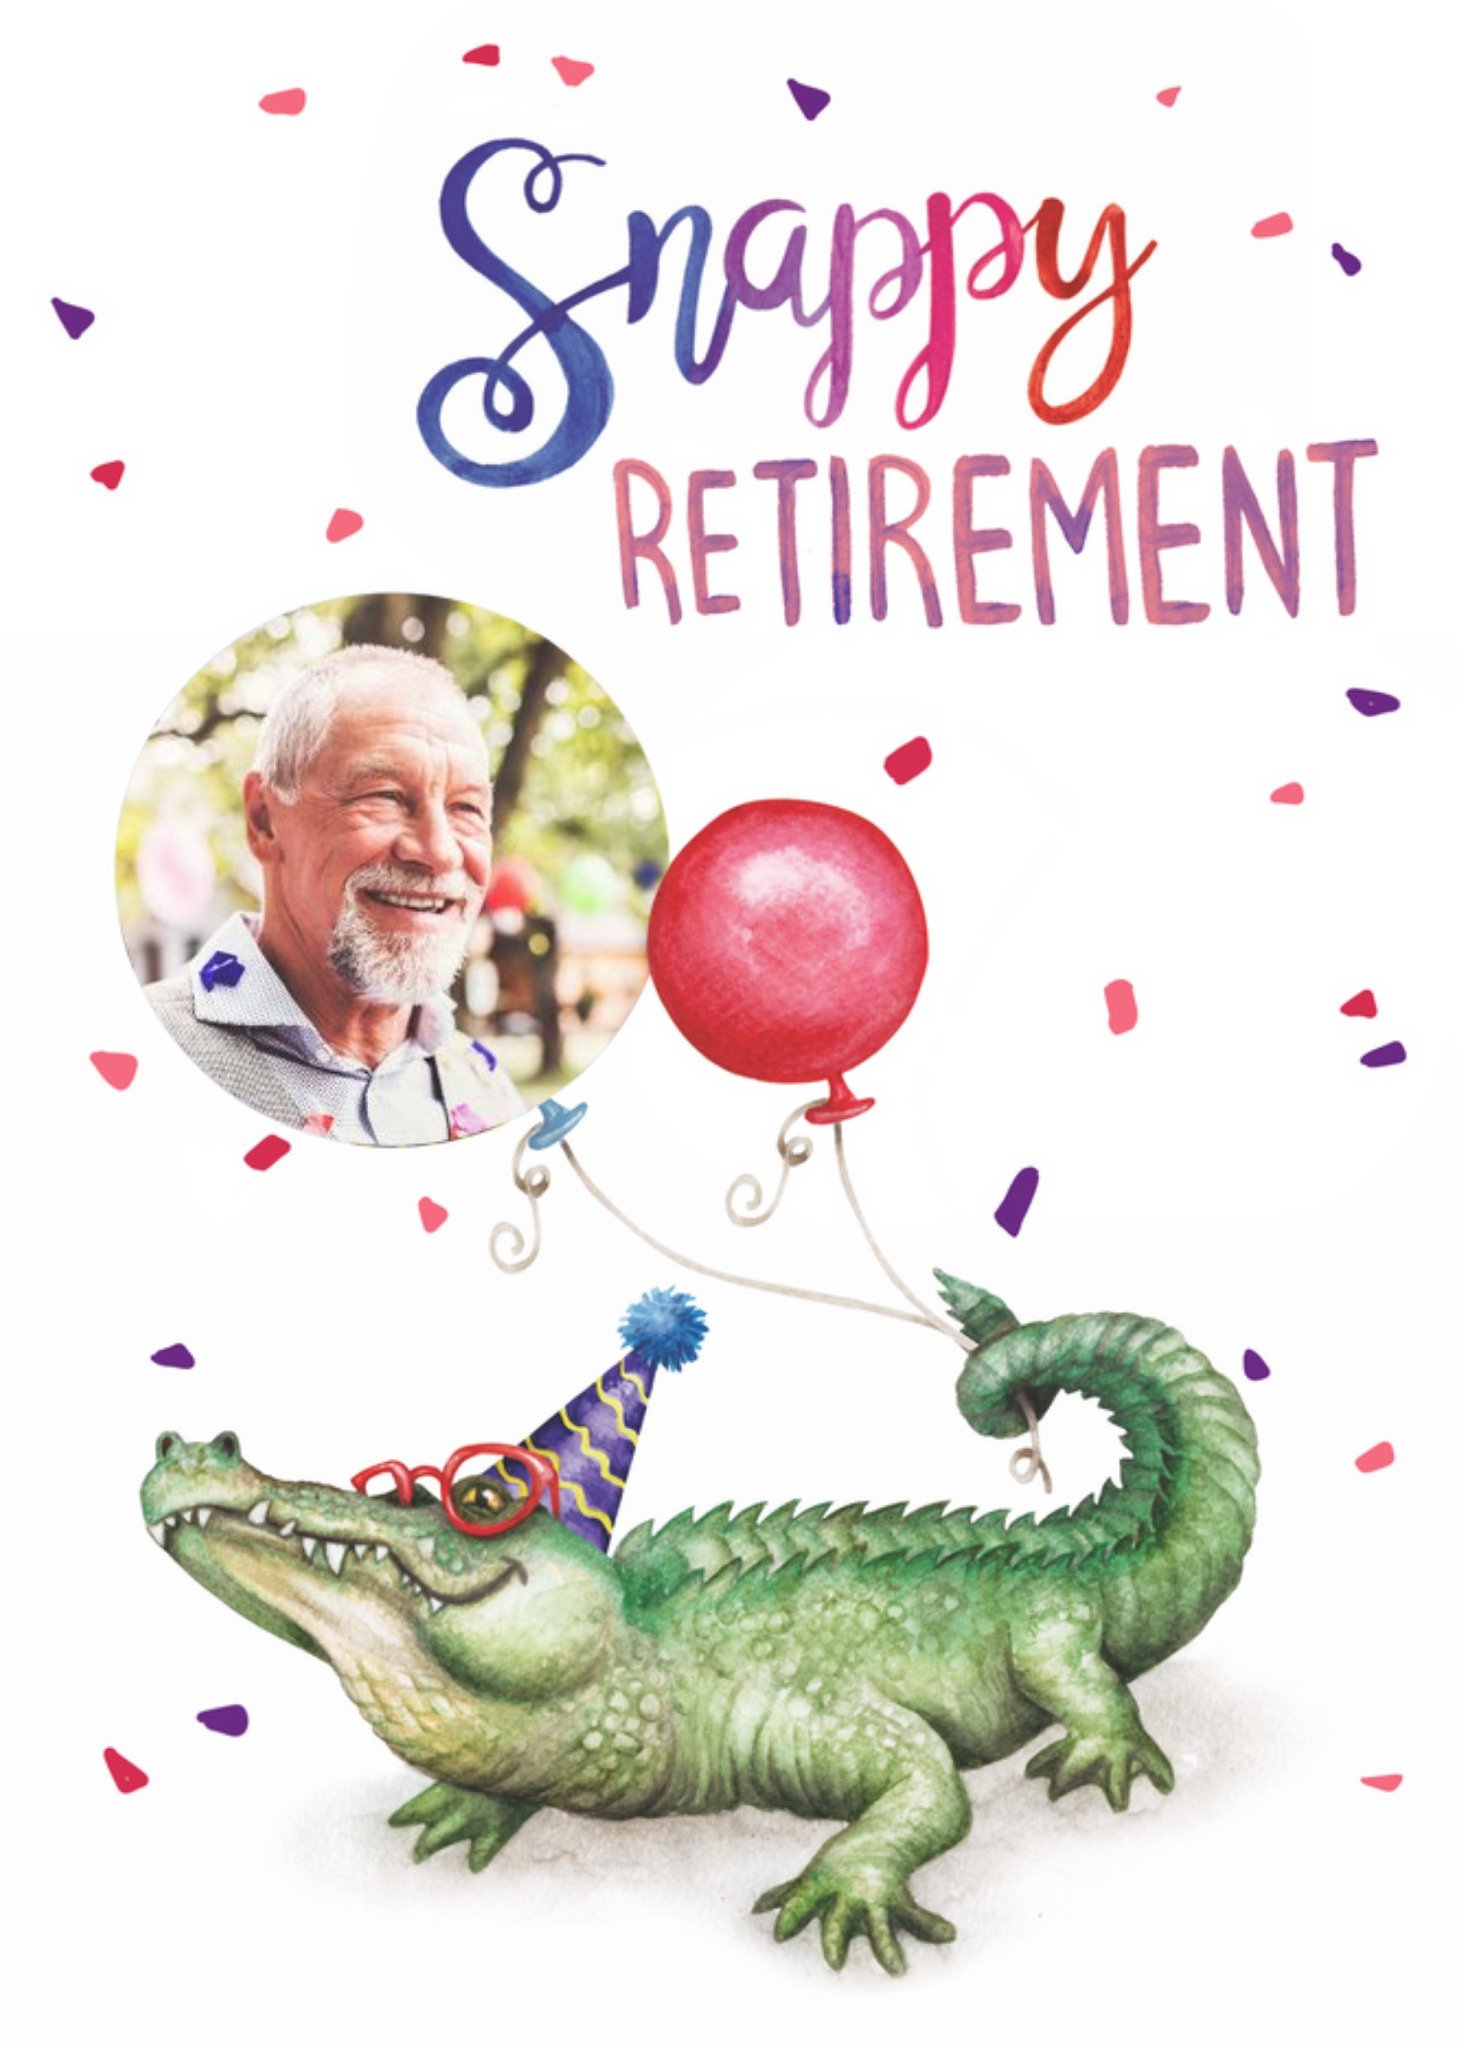 Moonpig Illustration Of A Crocodile With Balloons Funny Pun Photo Upload Retirement Card, Large